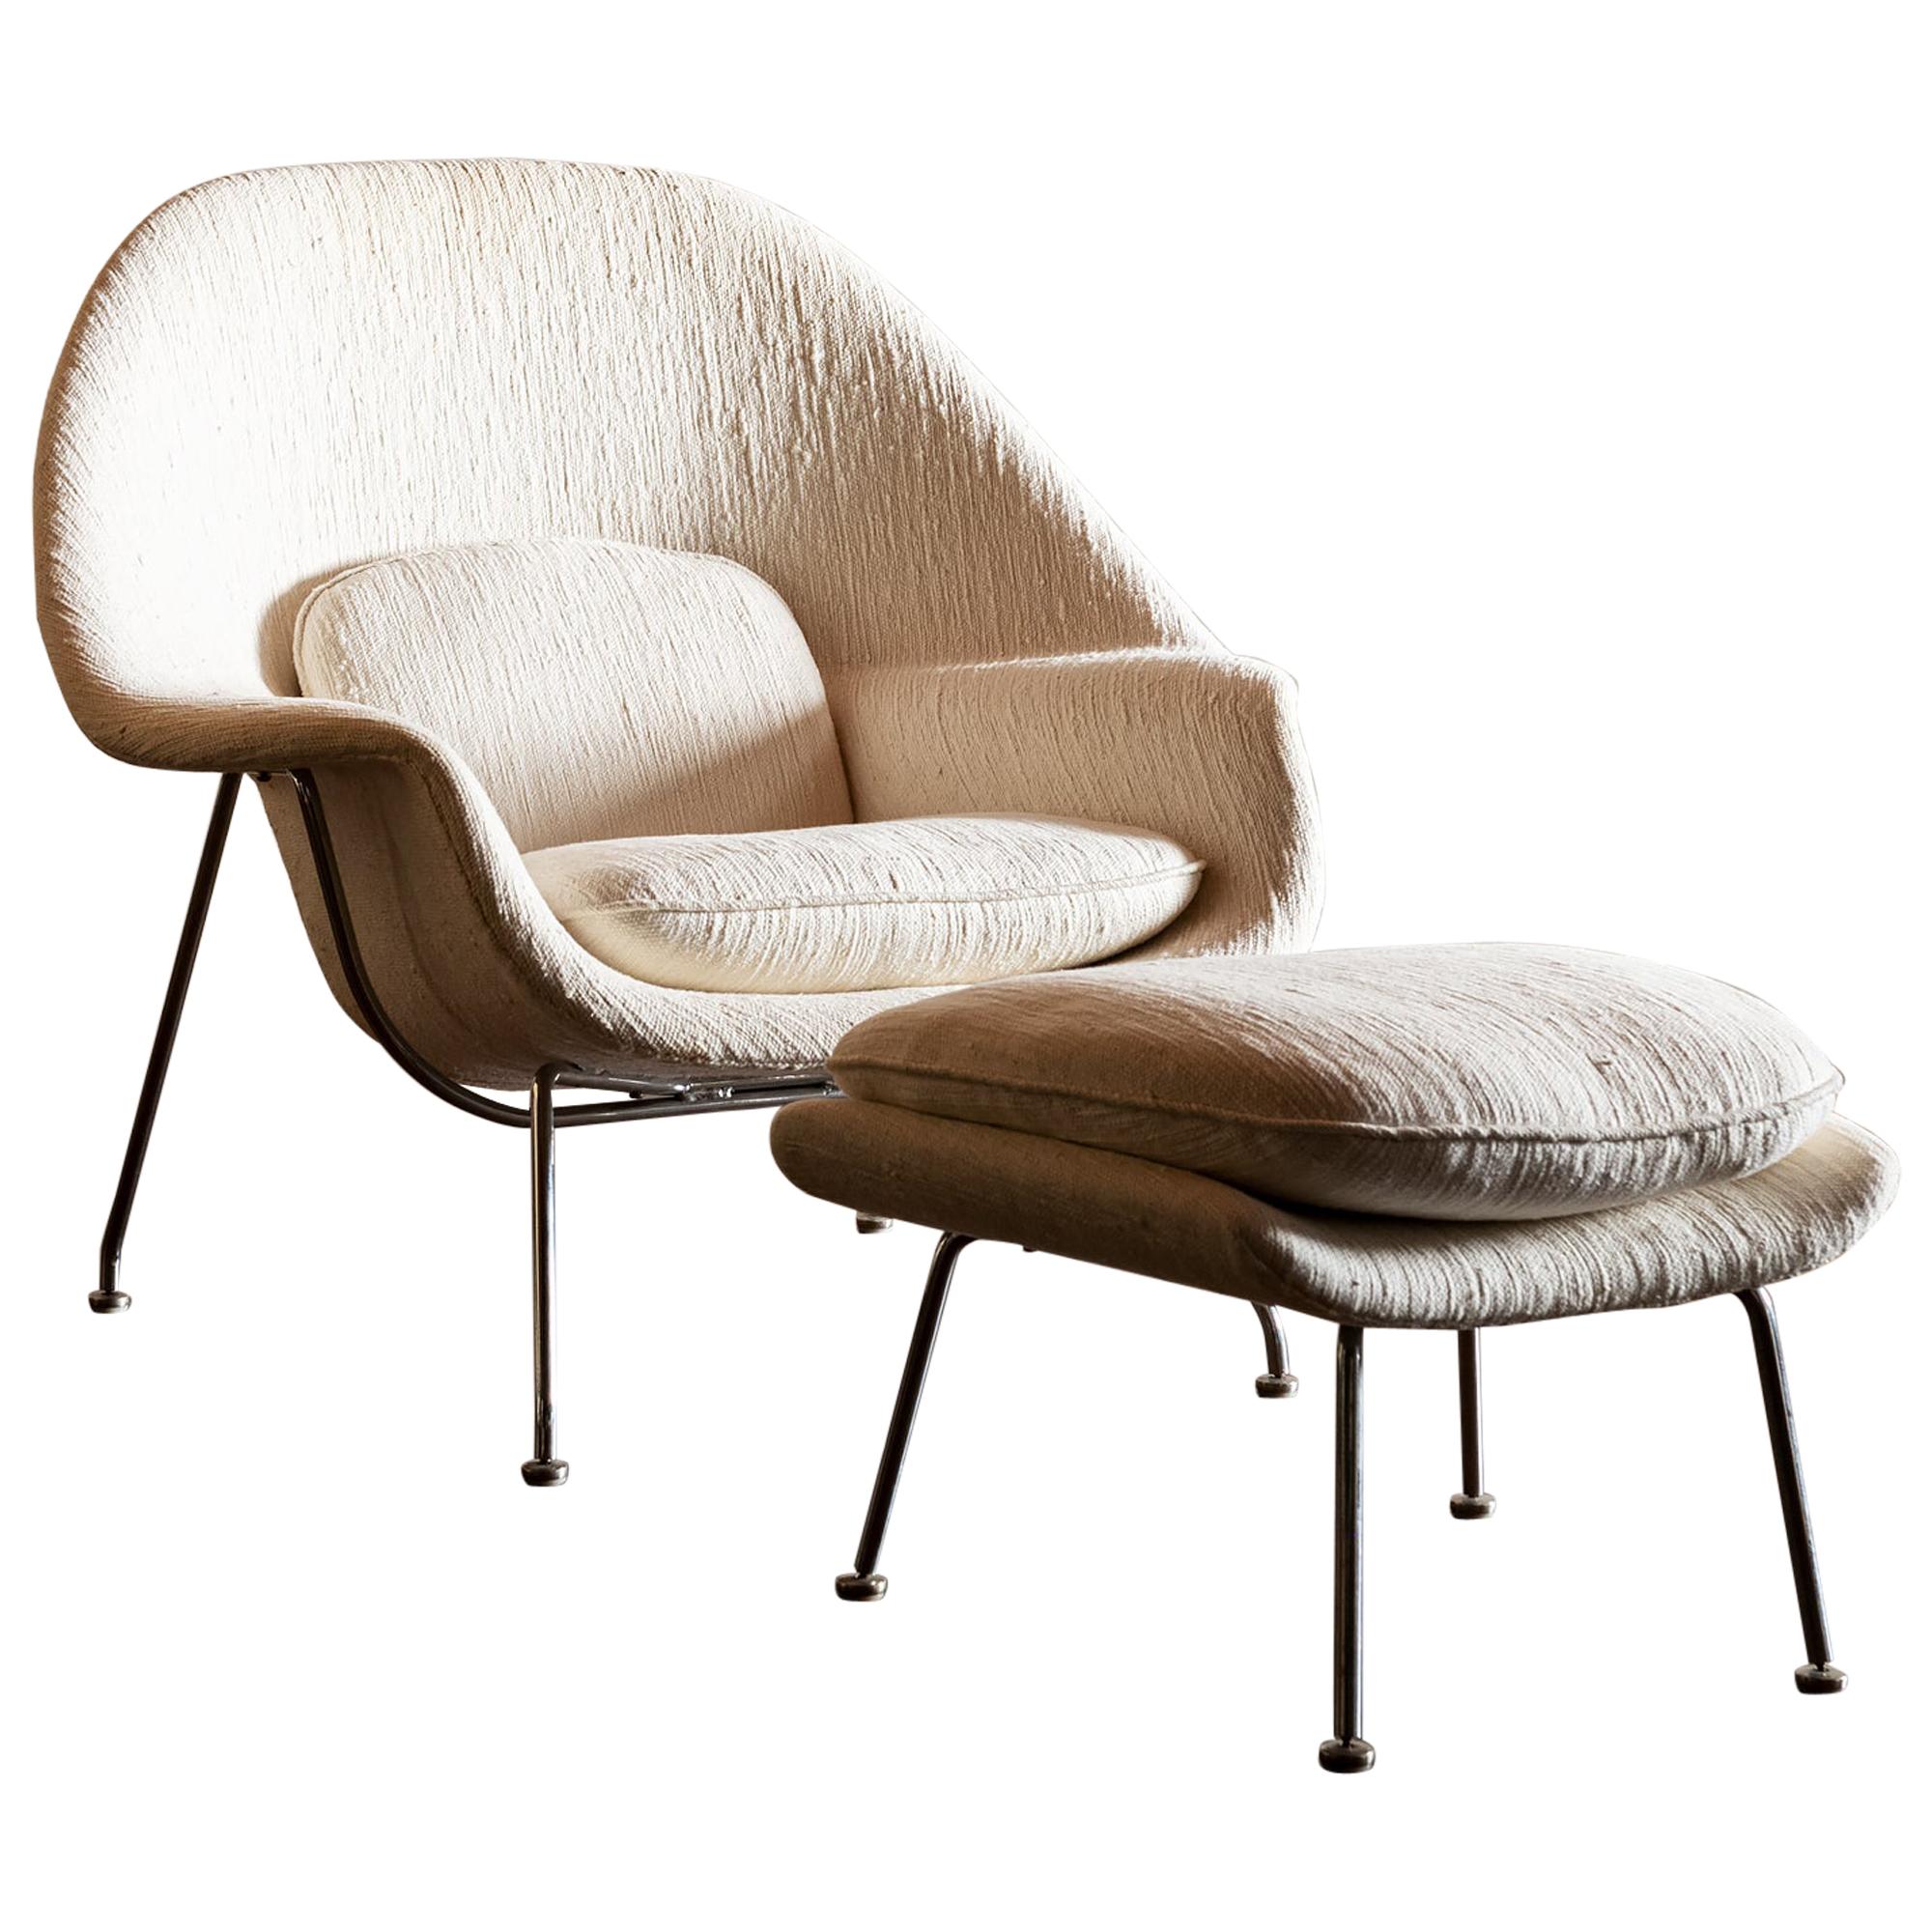 Iconic Womb Chair and Ottoman by Eero Saarinen for Knoll, United States, 1960s